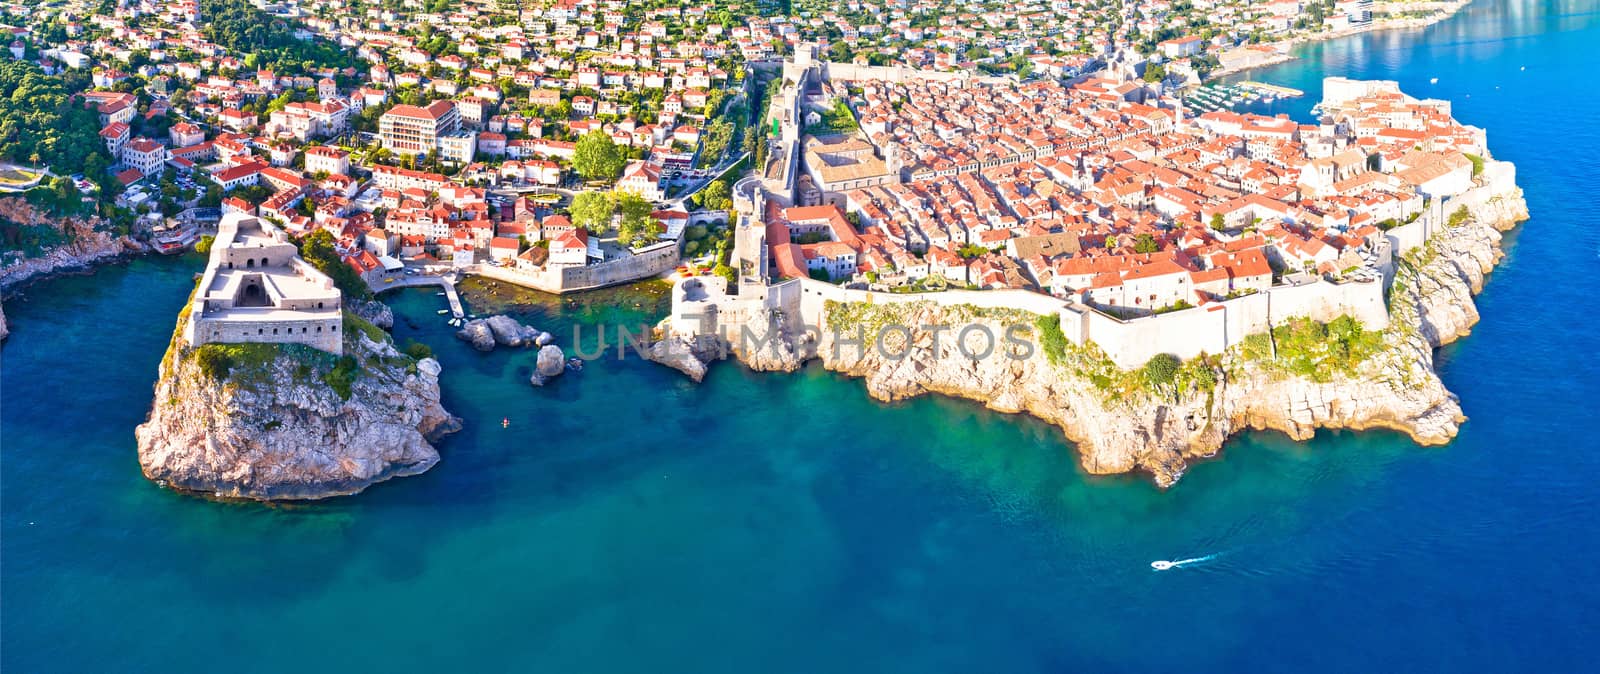 Historic city of Dubrovnik aerial panoramic view by xbrchx